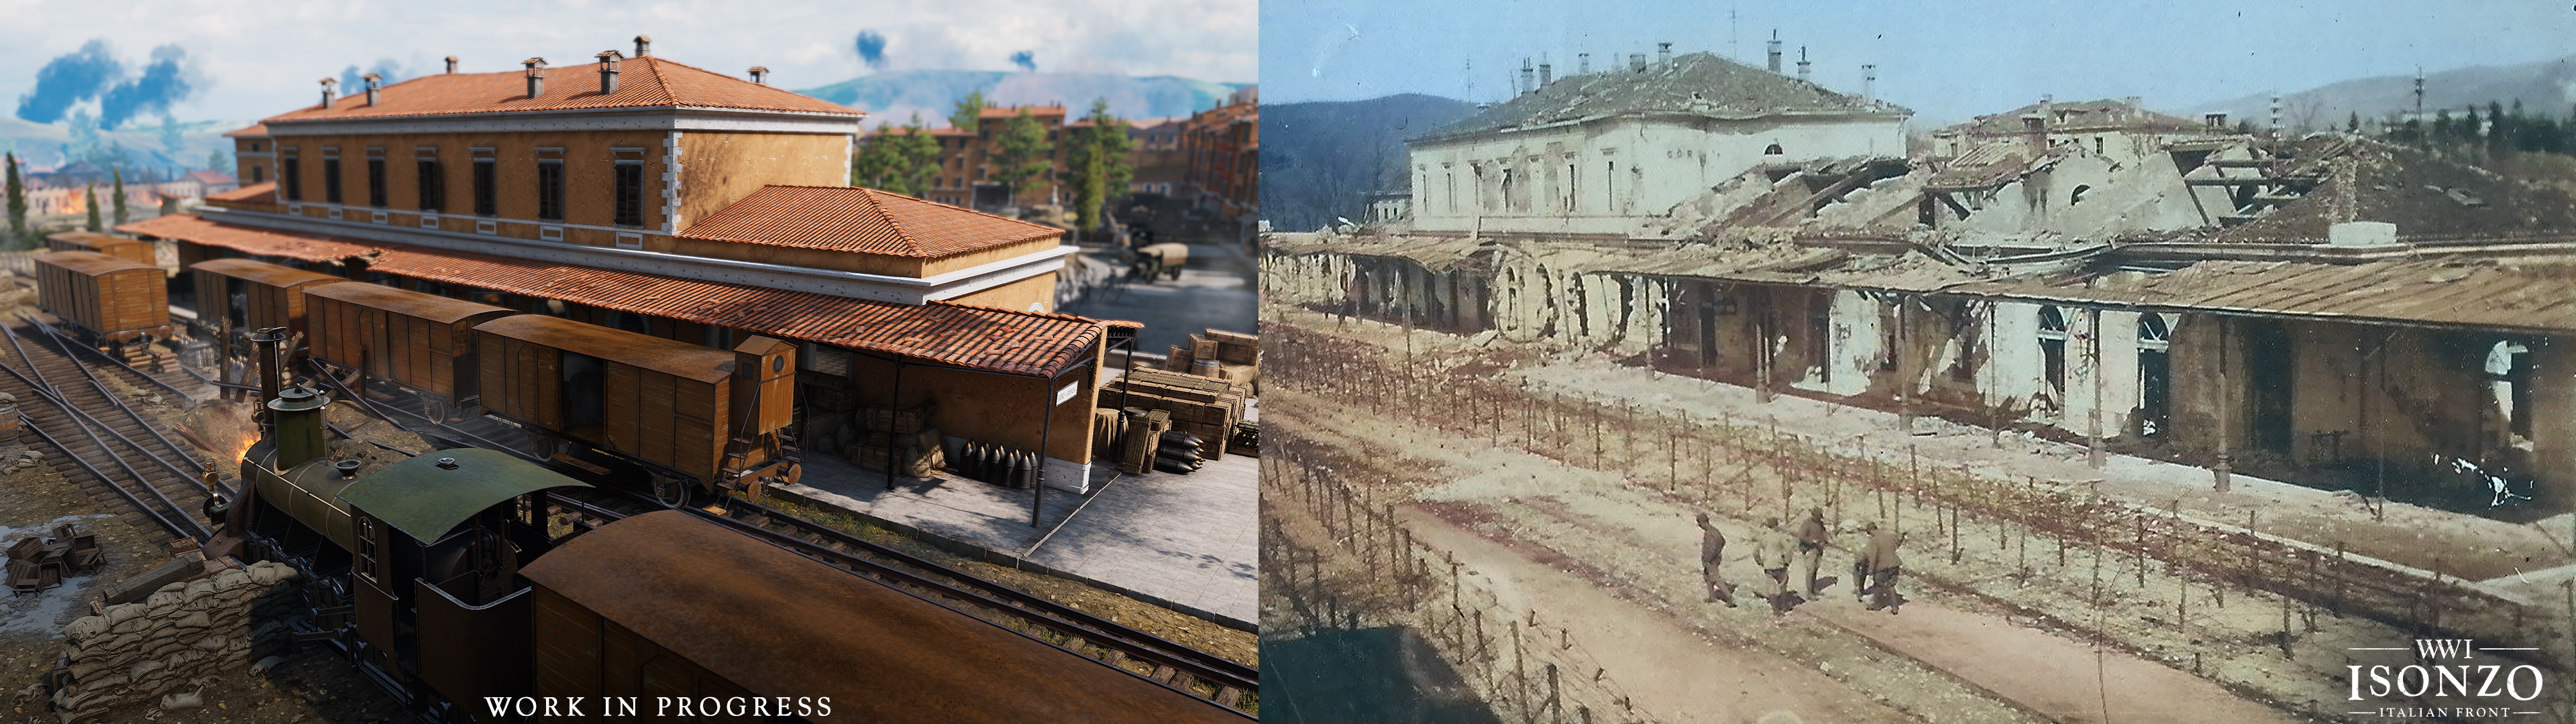 Comparison of the in-game train station to historical photo.